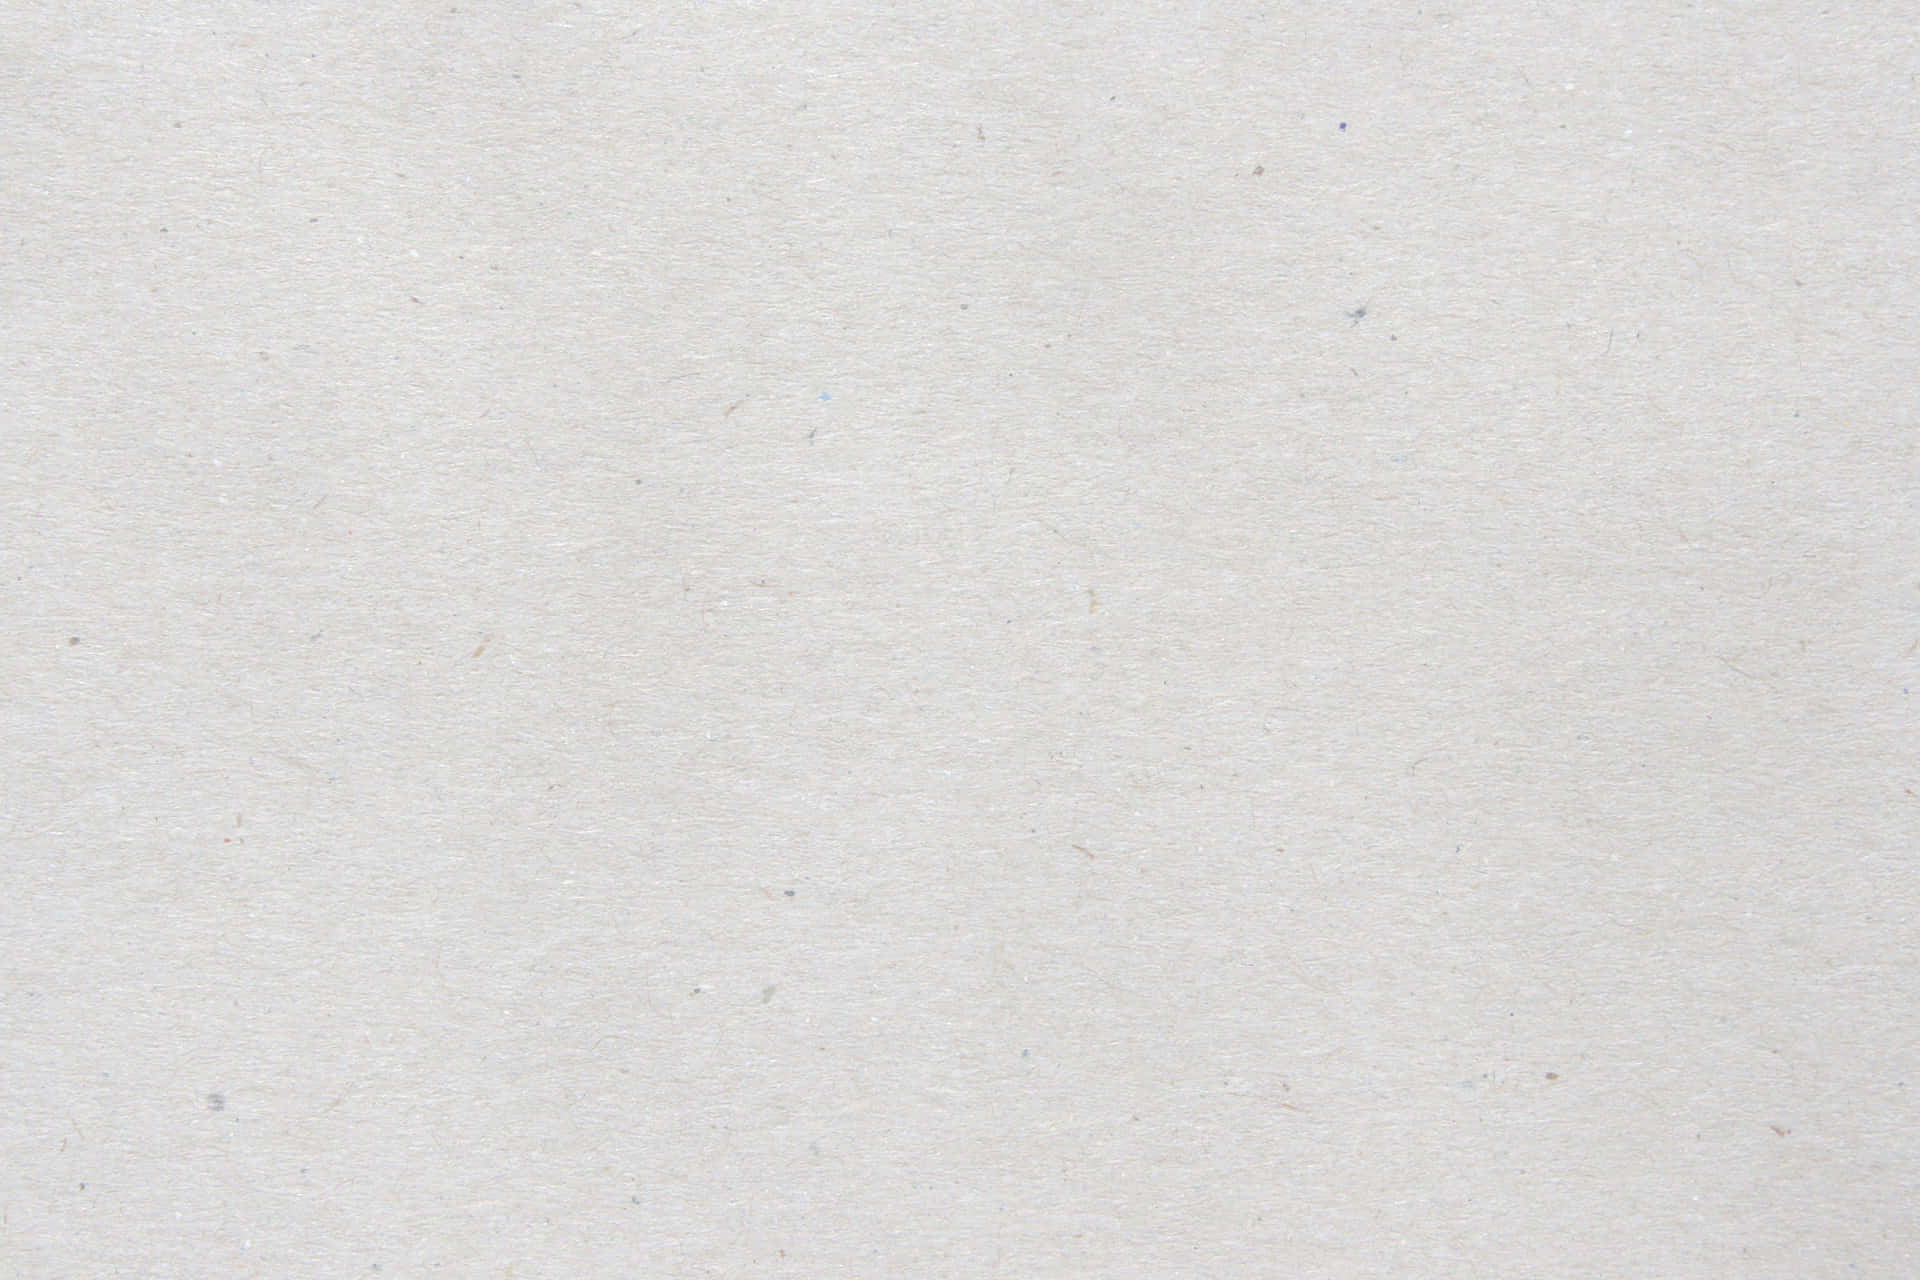 Abstract background made of white paper